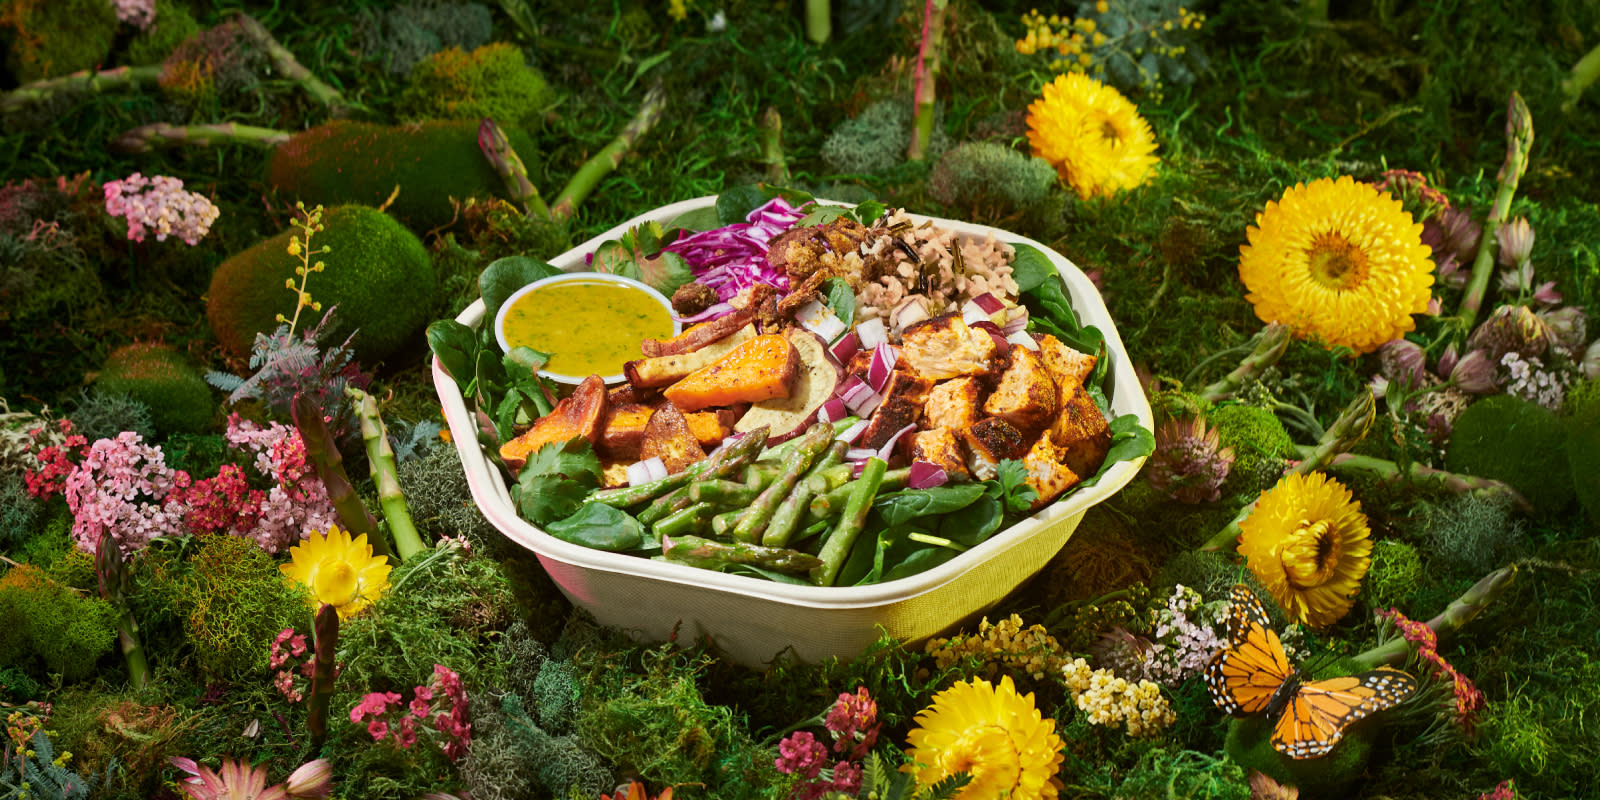 A compostable bowl of salad with green beans, spinach, sweet potatoes, purple cabbage, mushrooms, greens and a small dish of salad dressing rests on a bed of dandelions, moss, flowers, and asparagus. A monarch butterfly is in the corner of the image.